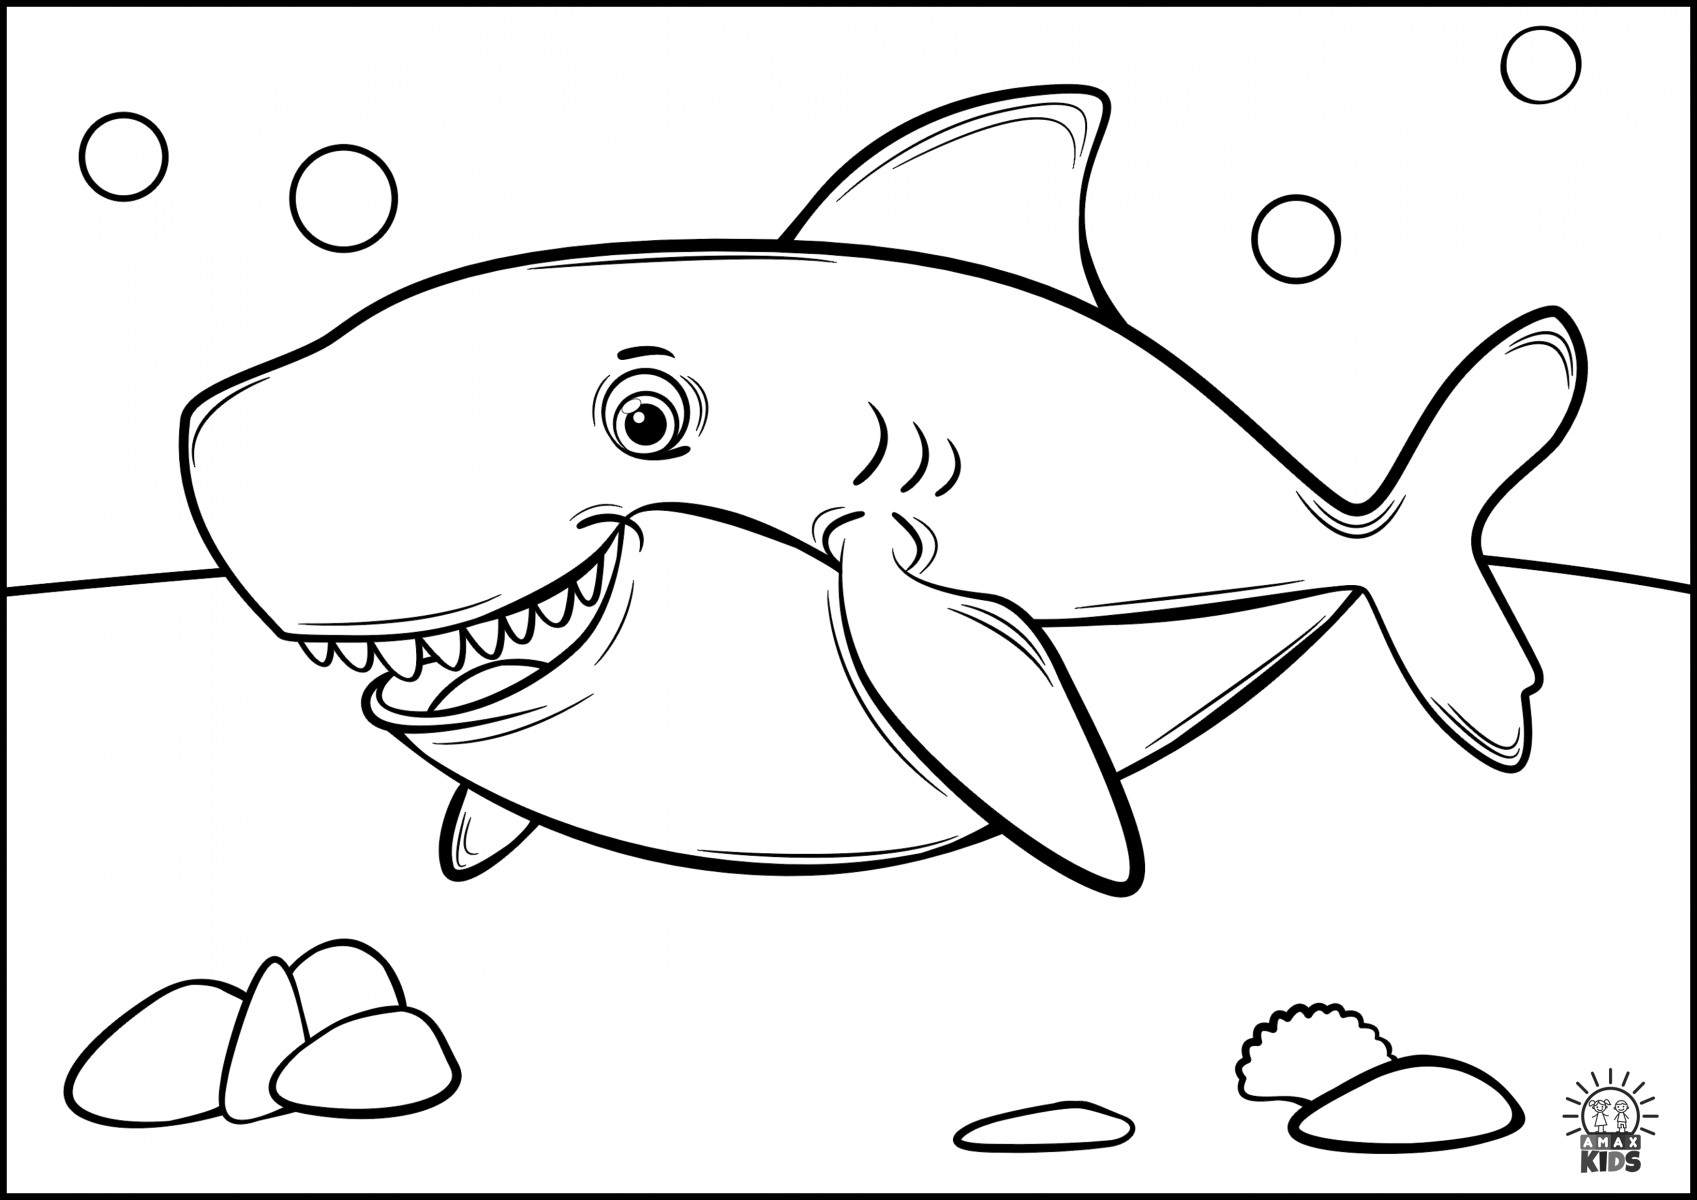 Download Coloring pages for kids with sea creatures | Amax Kids